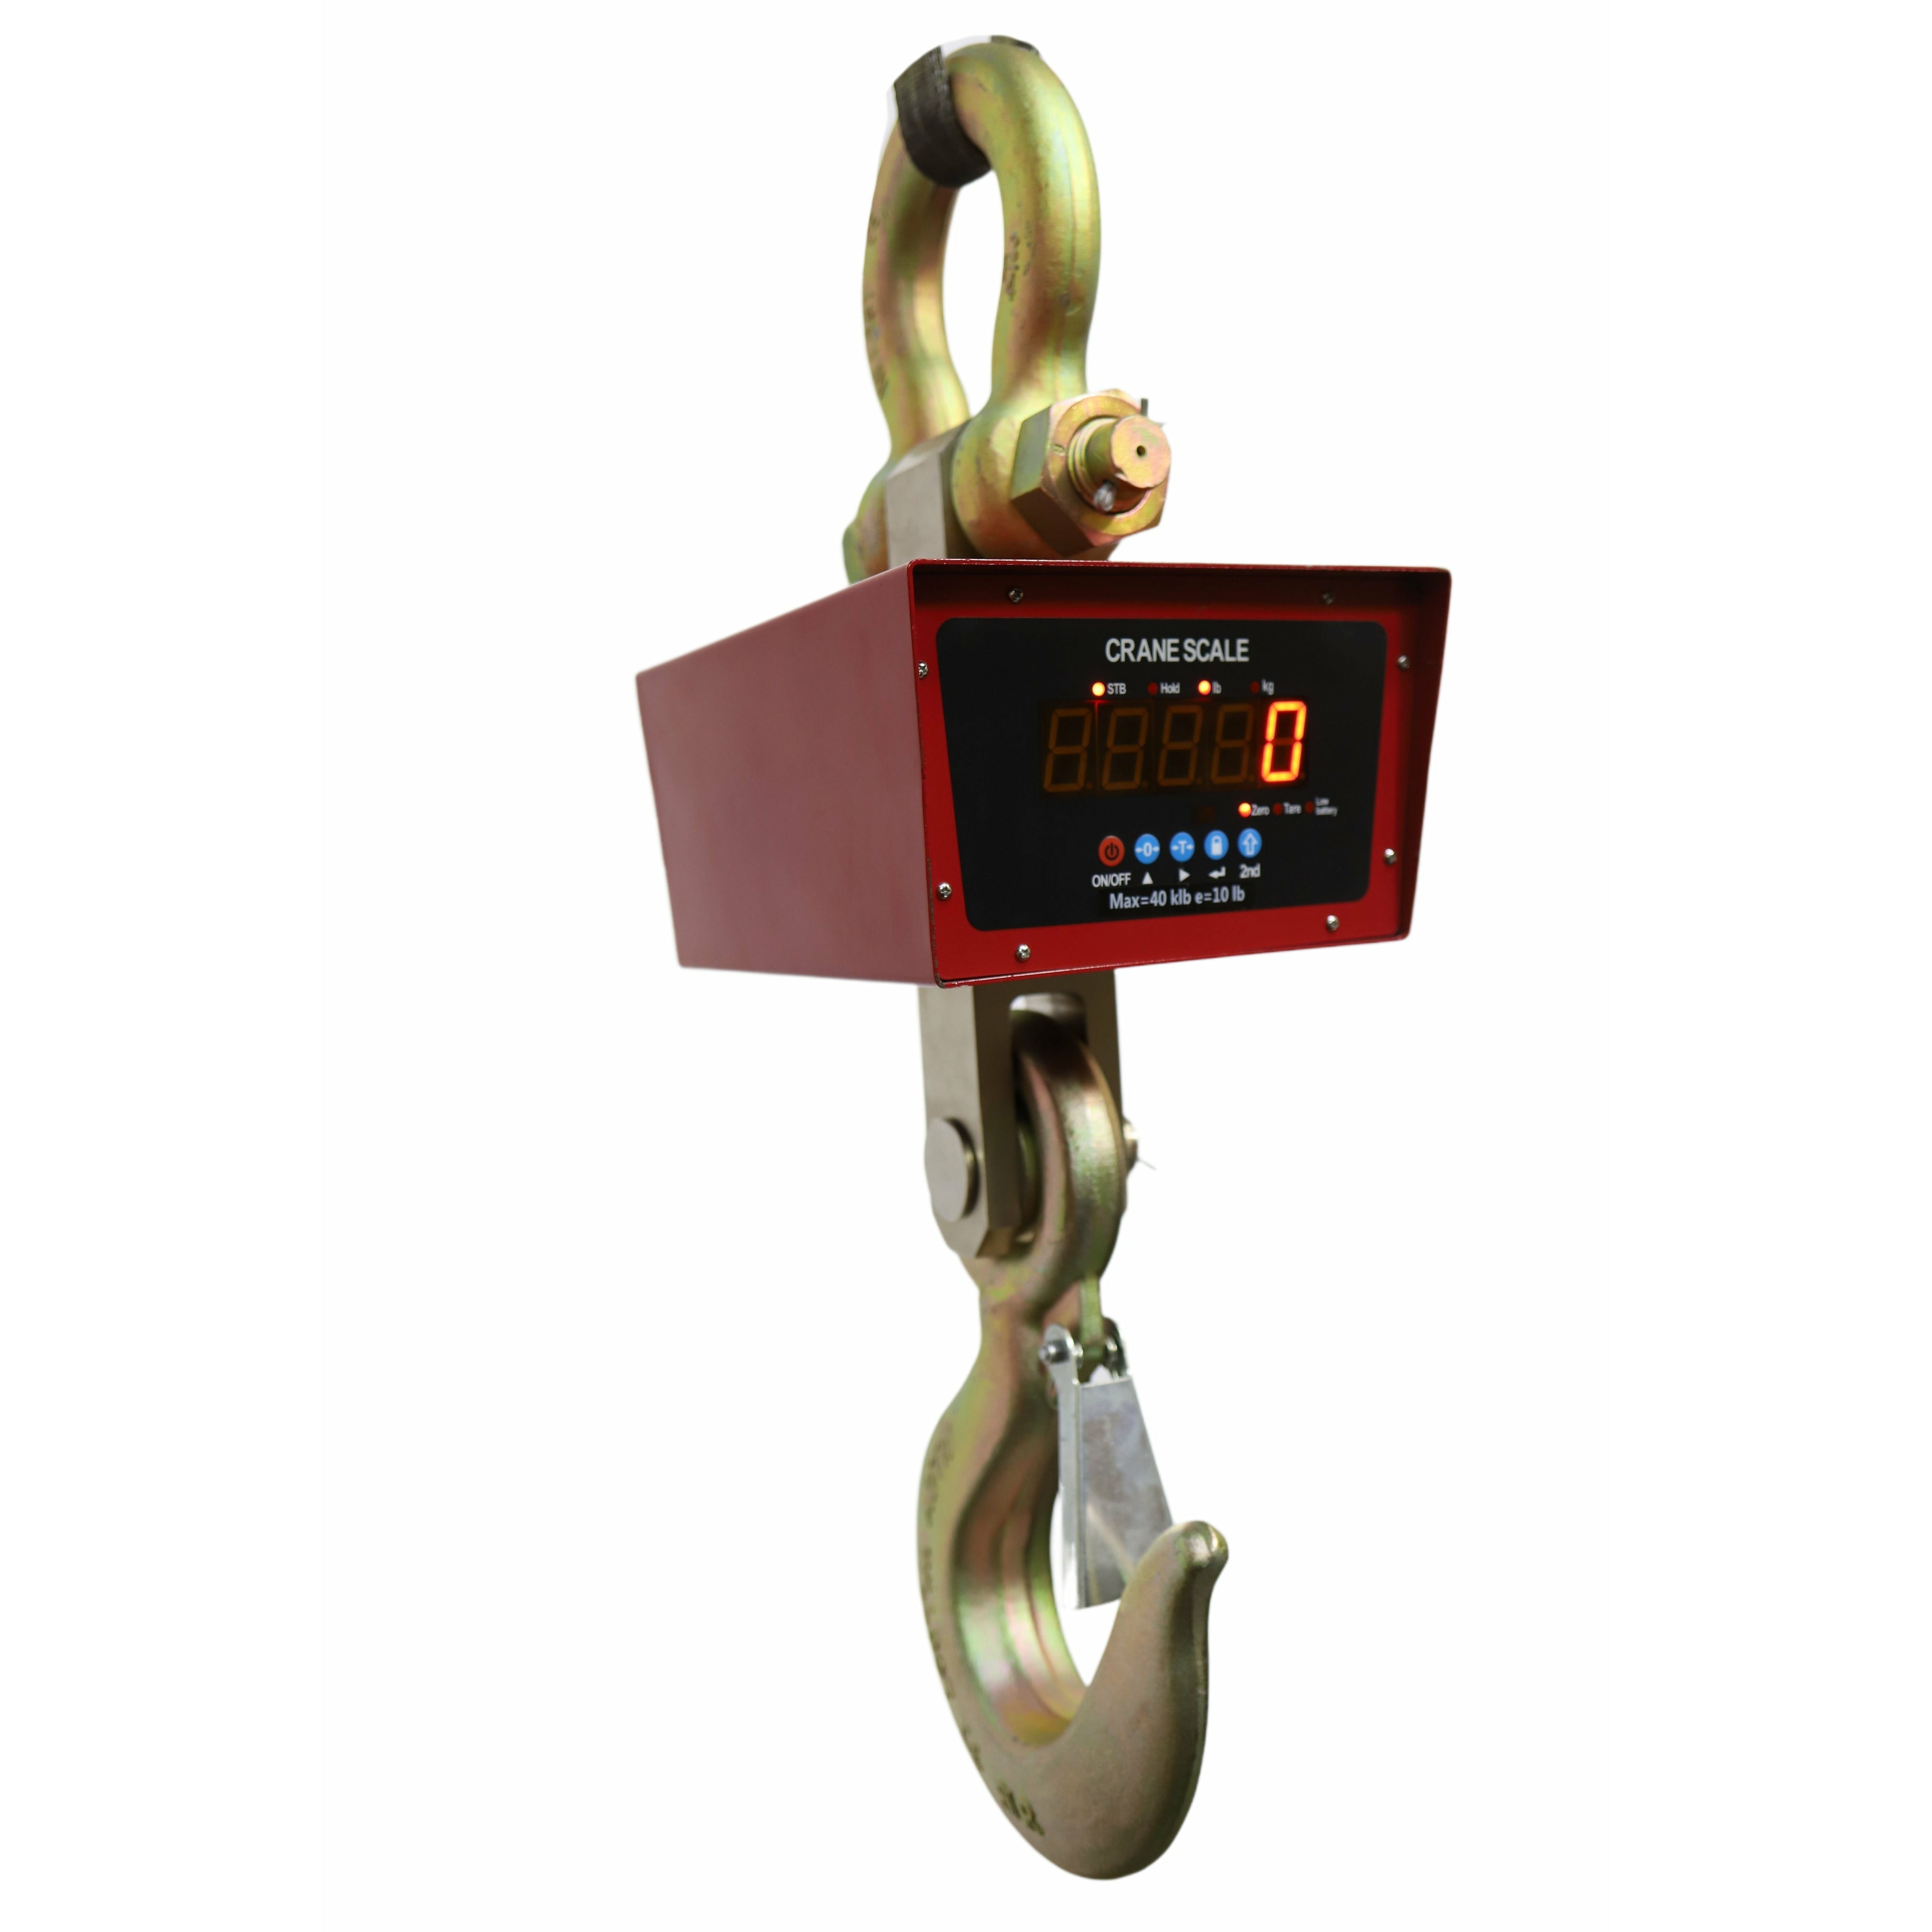 Shop SL-925 Heavy Duty Crane Scale With LCD & LED